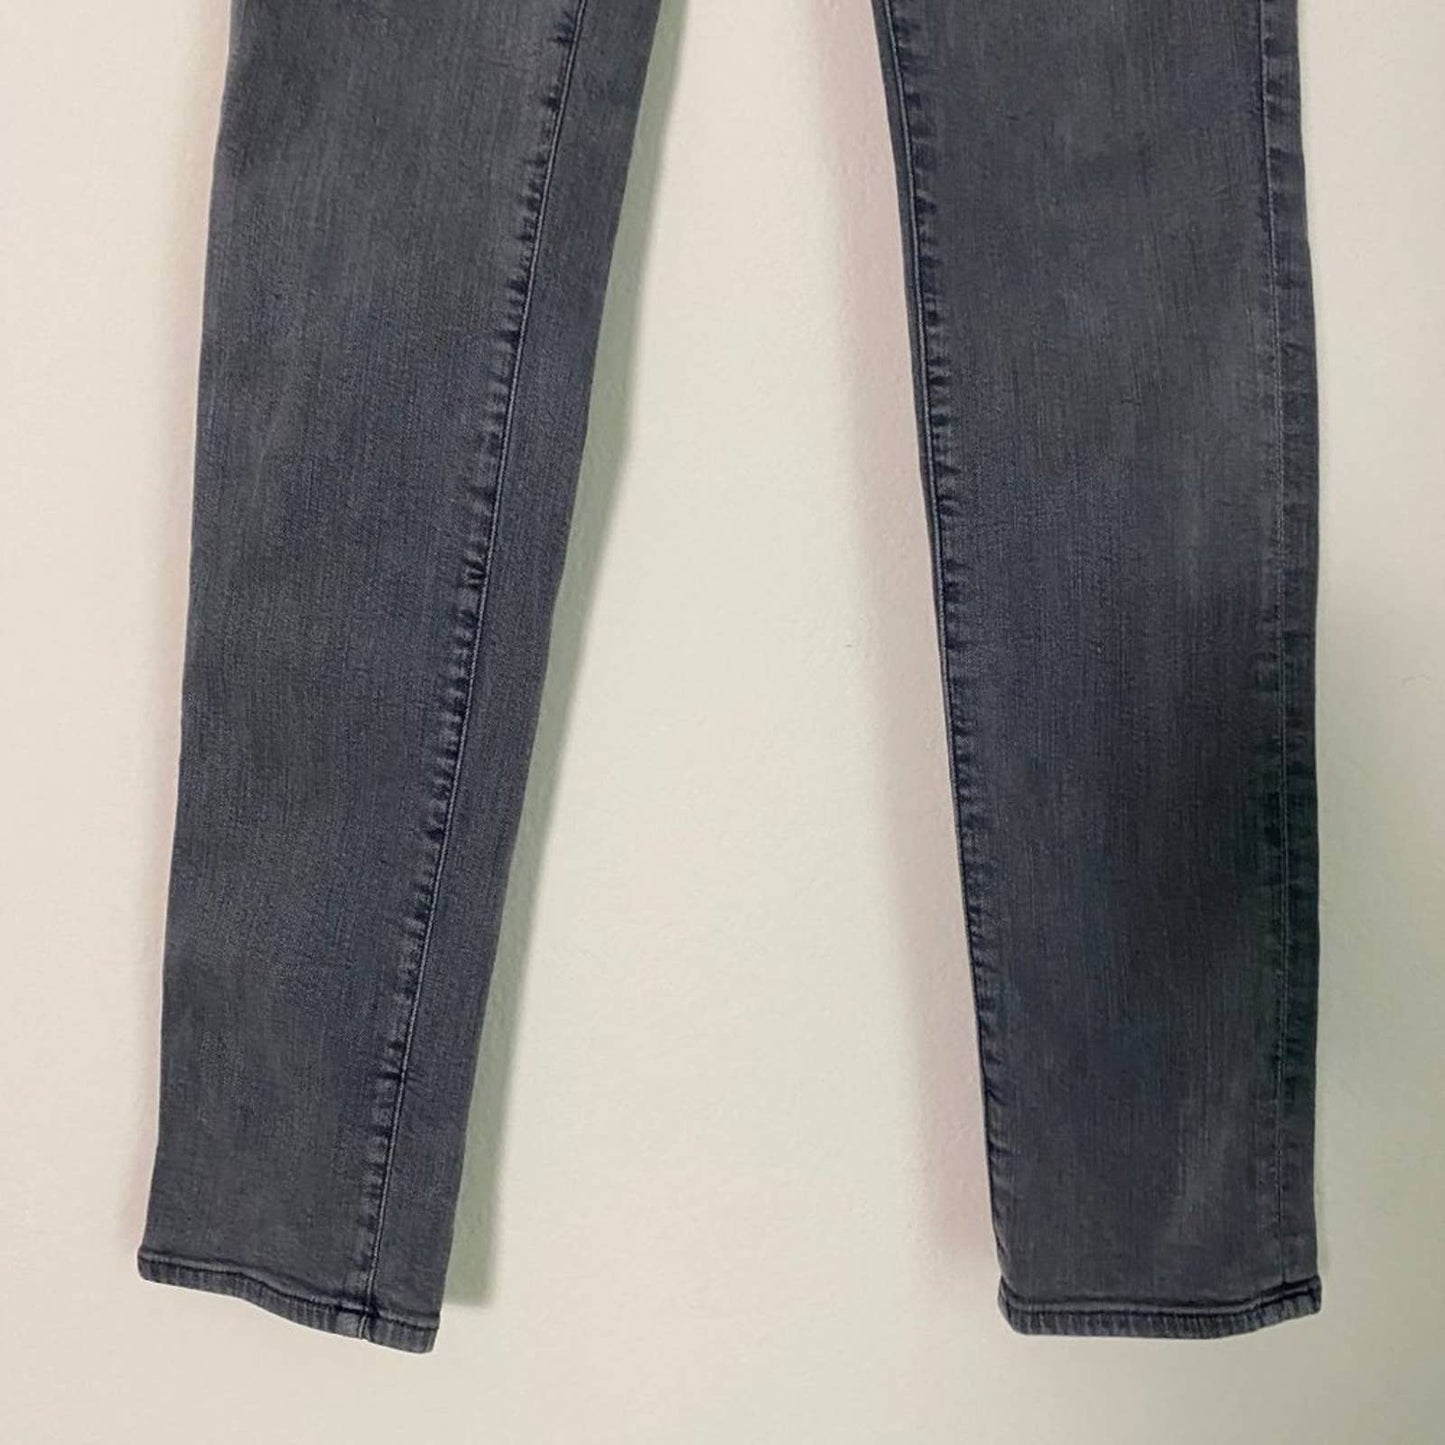 AG Adriano Goldschmied sz 27 The legging super skinny fit jeans